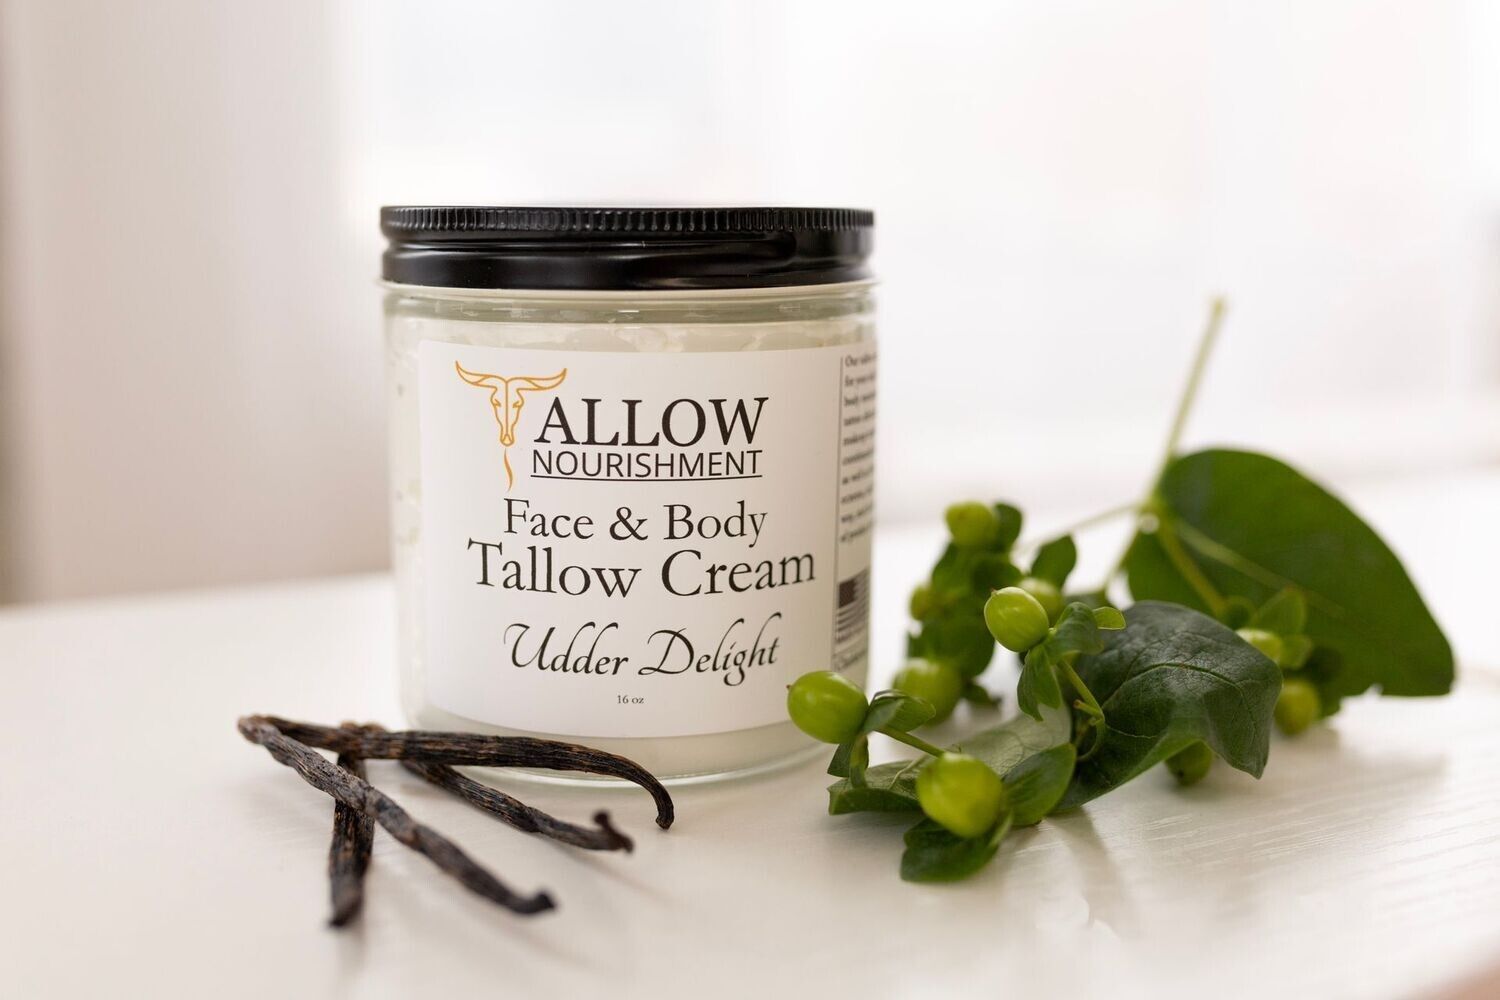 A jar of tallow cream is sitting on a table next to vanilla beans.